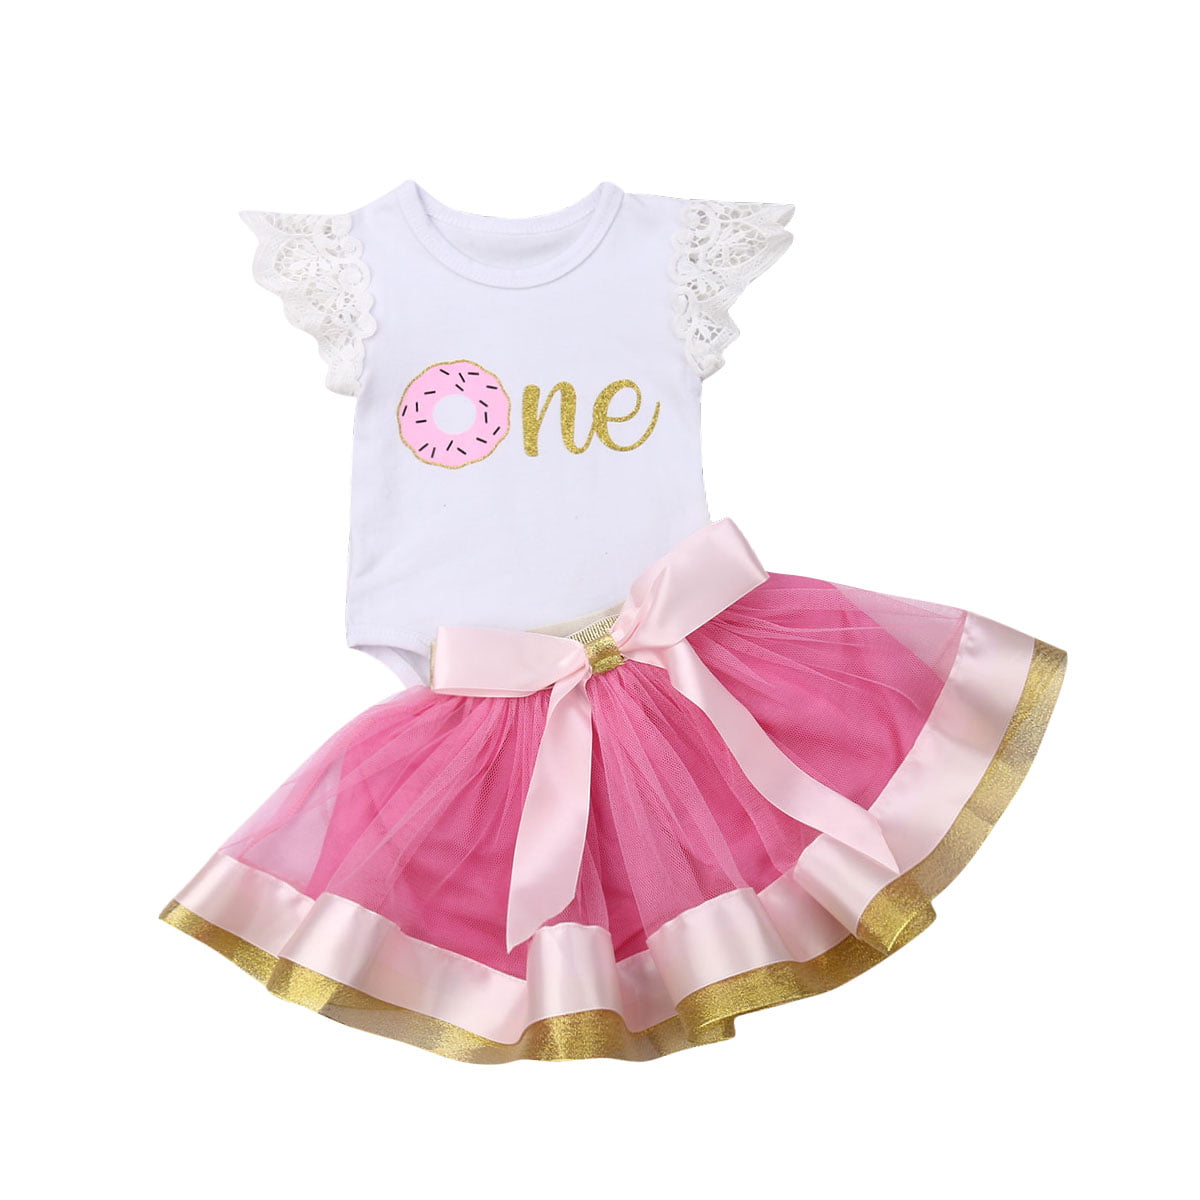 Donut Tutu Dress Baby Girls 1st Birthday Tutu Tulle Party Romper Outfits Photos 